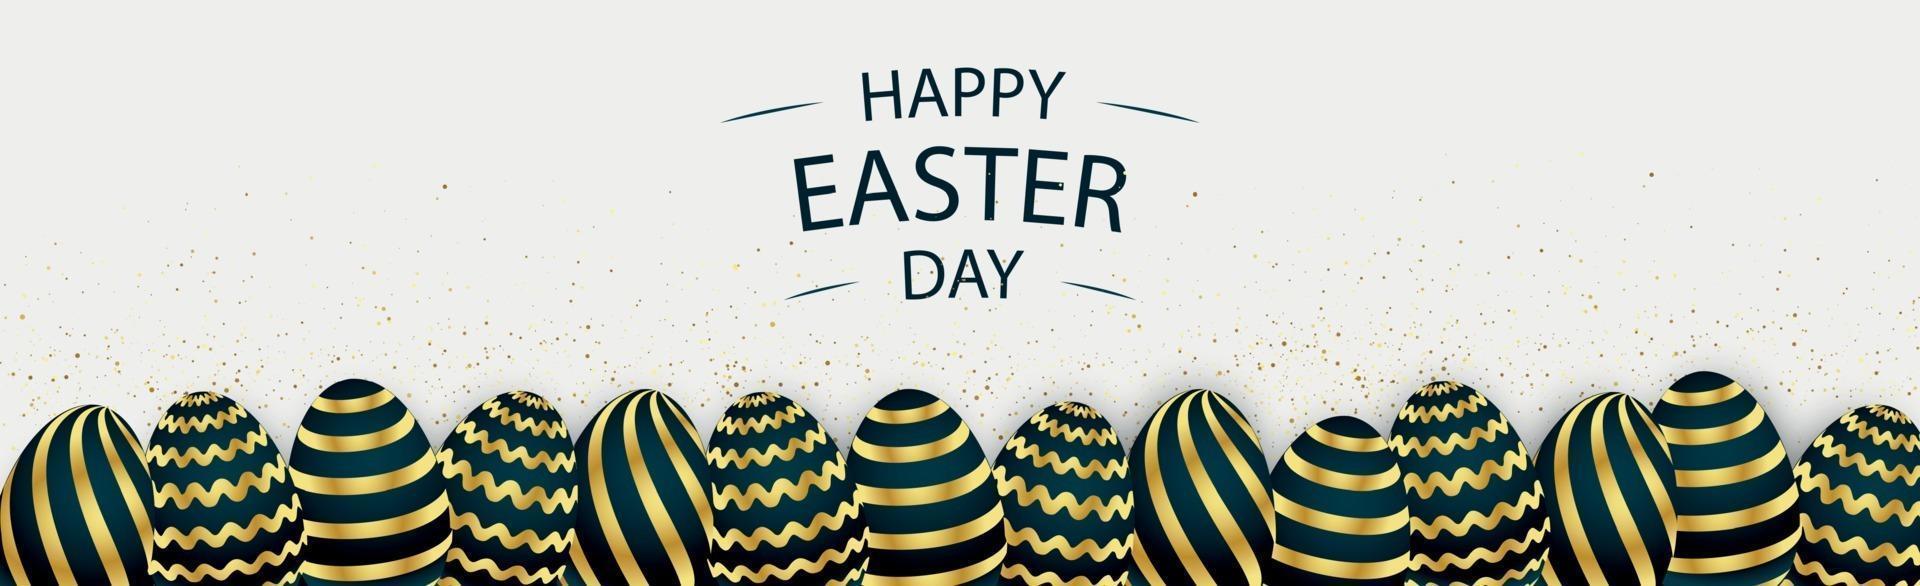 Easter background with festive black and gold eggs - Vector